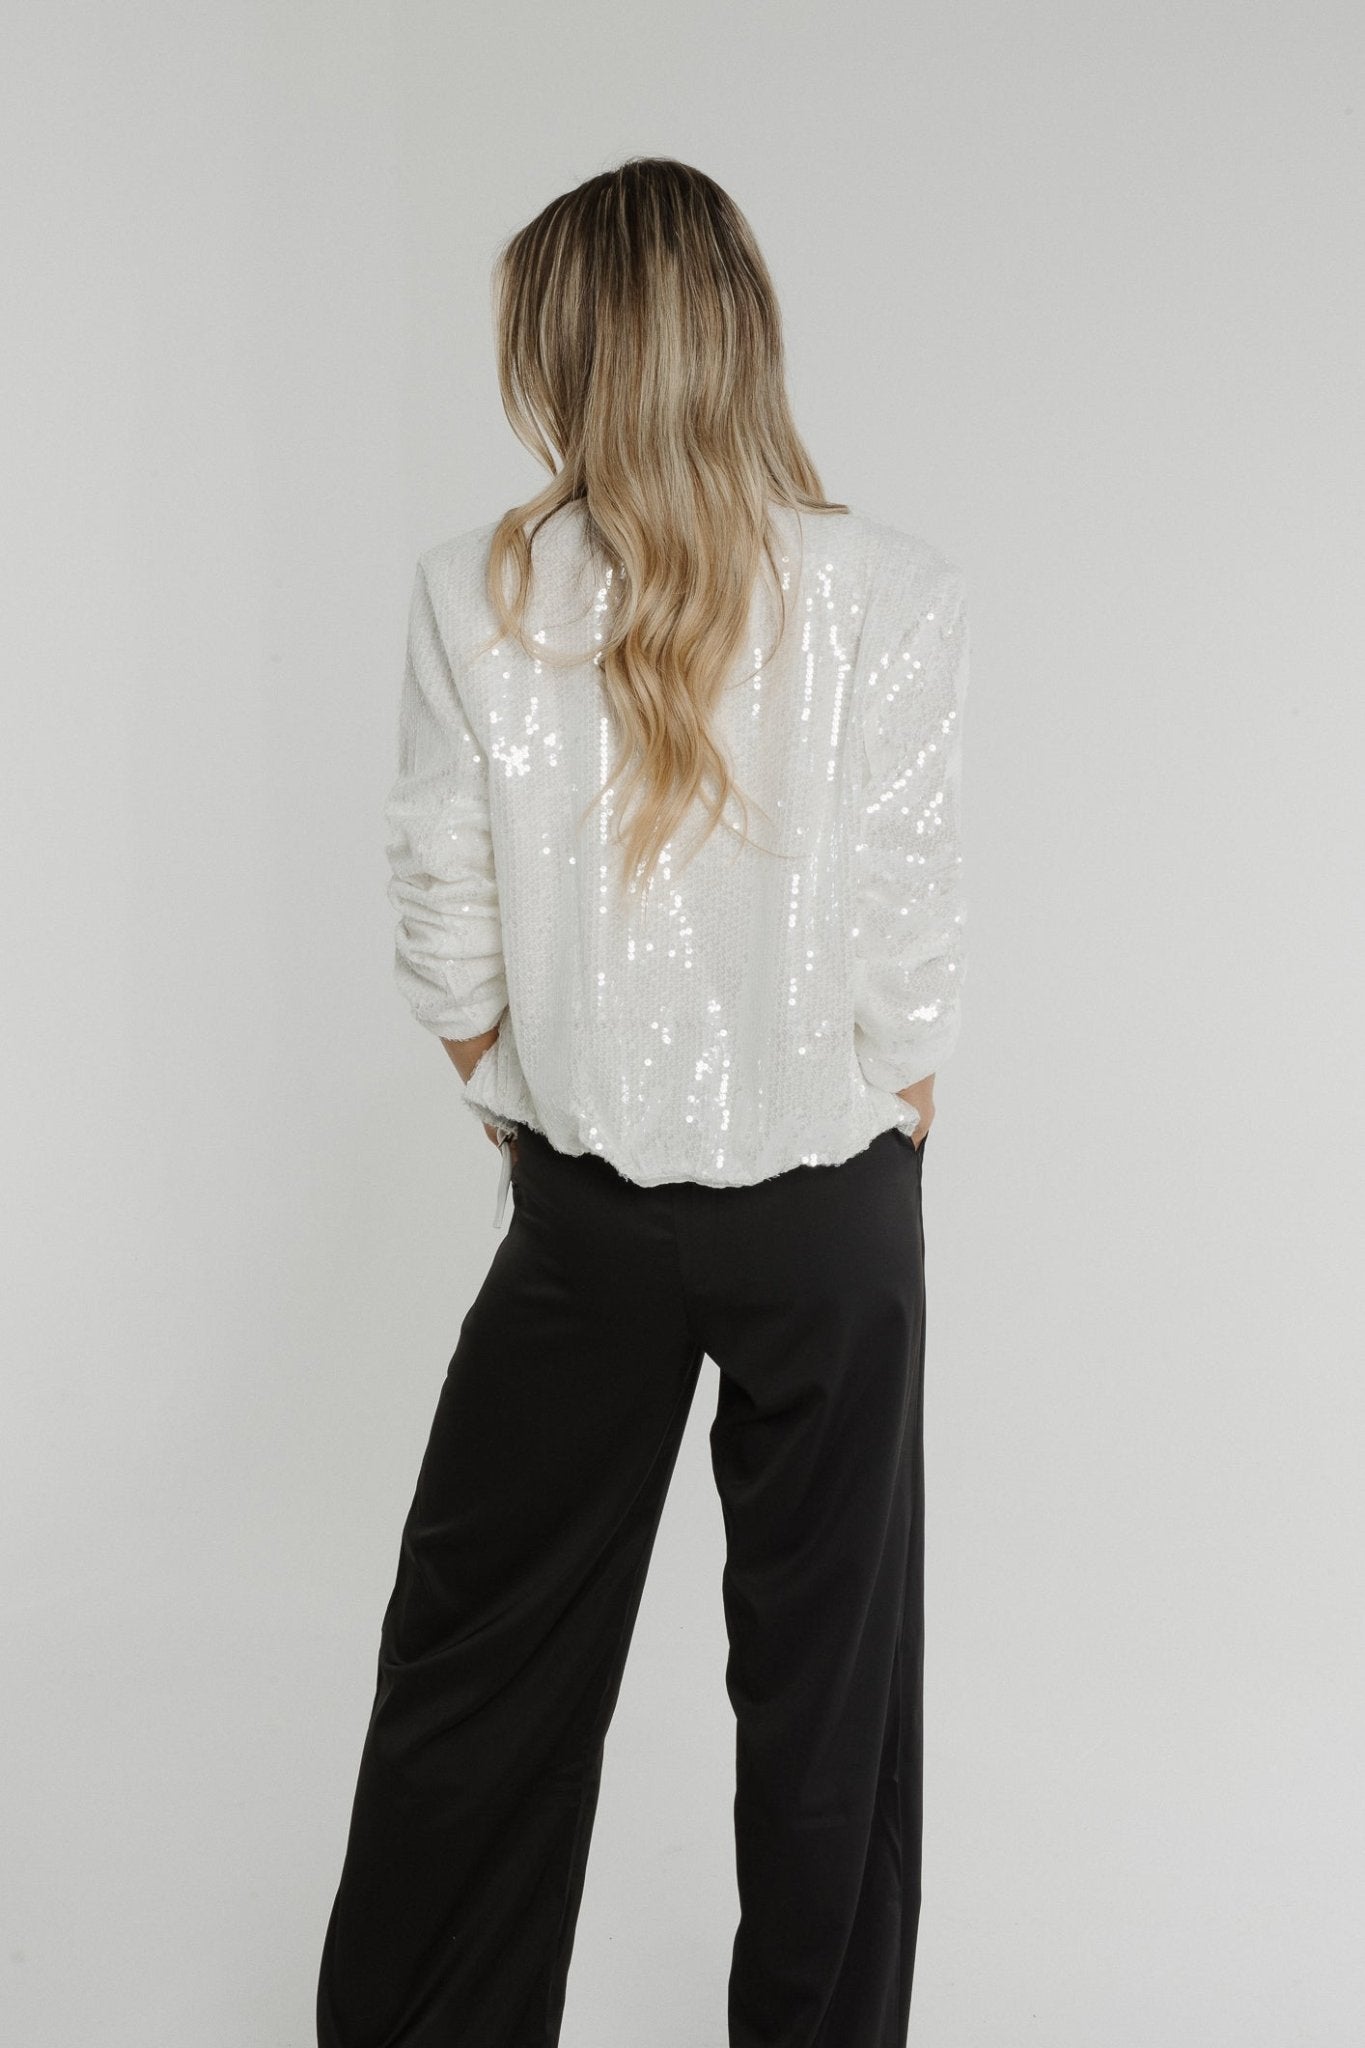 Holly Sequin Jacket In White - The Walk in Wardrobe